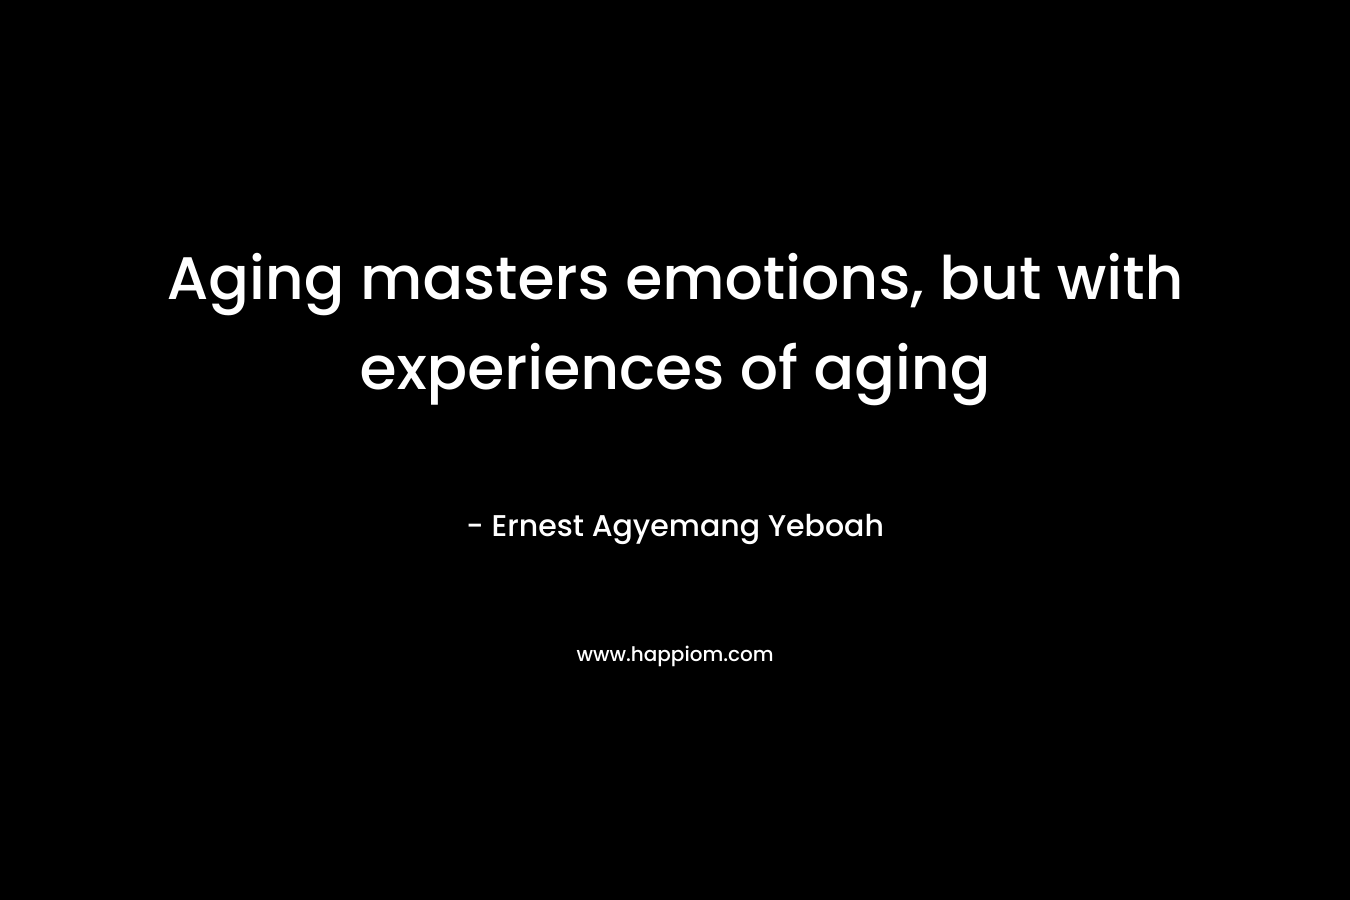 Aging masters emotions, but with experiences of aging